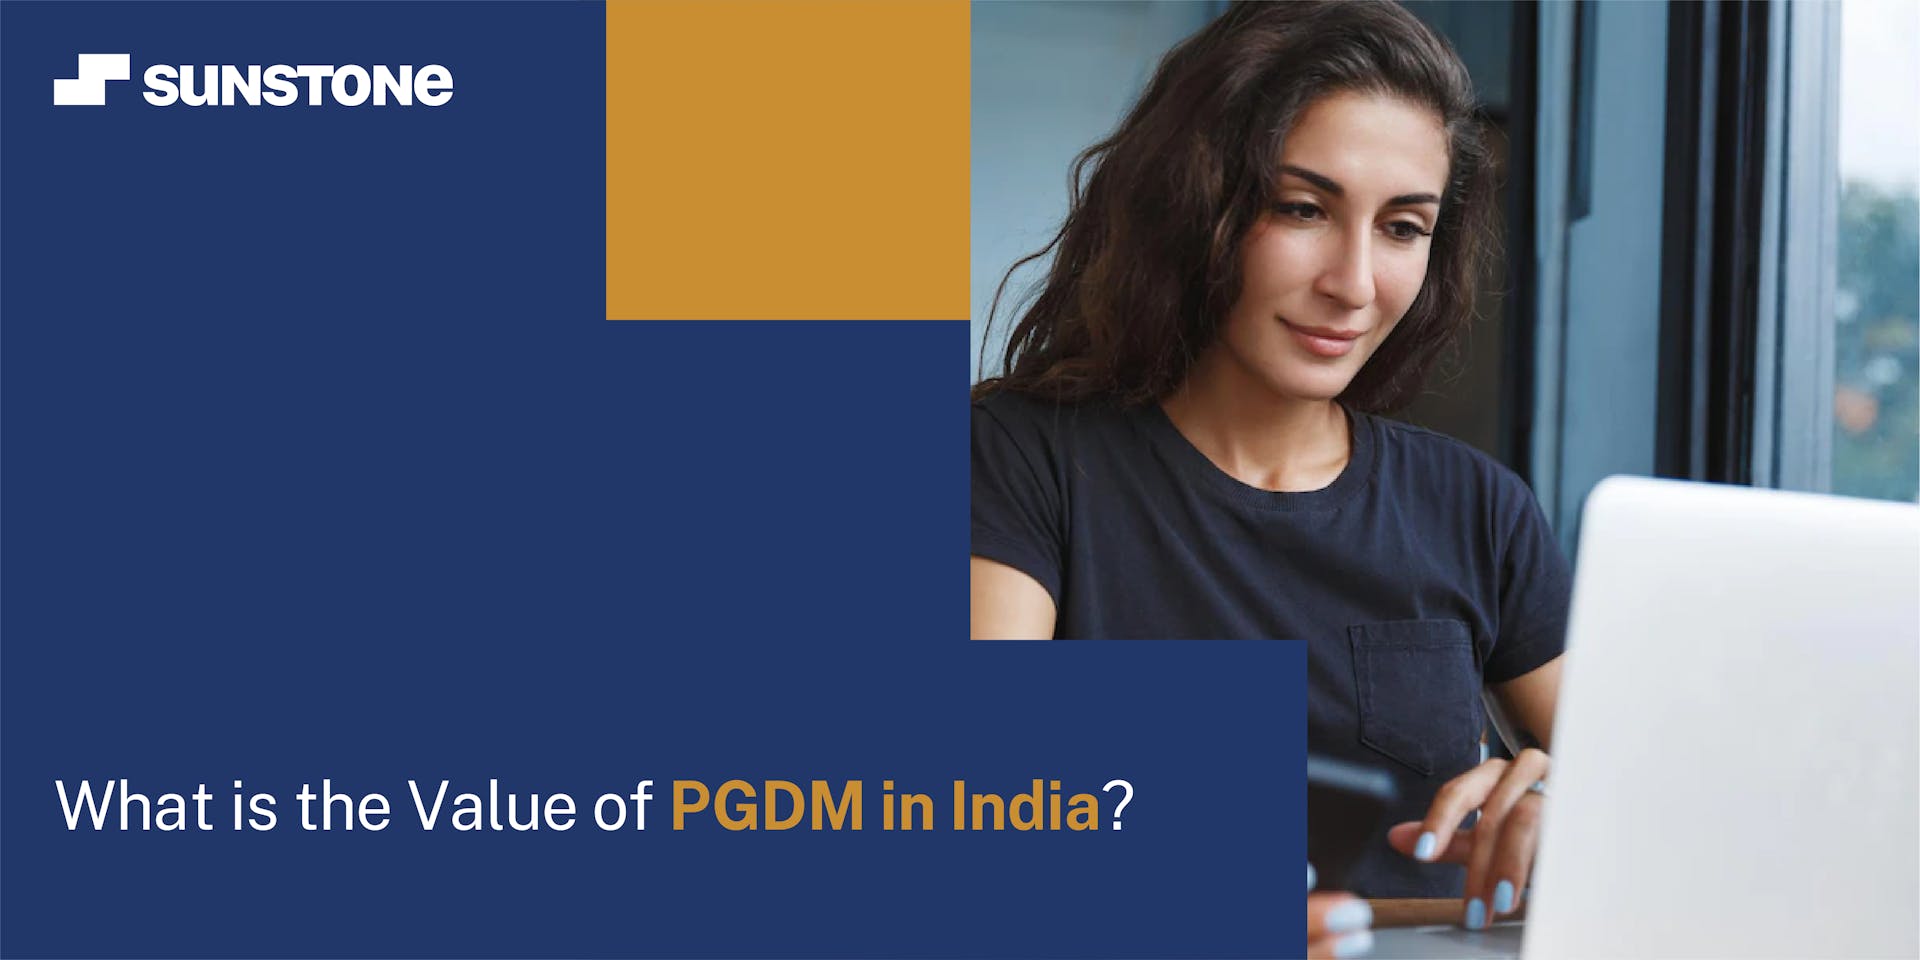 What is the Value of PGDM in India?